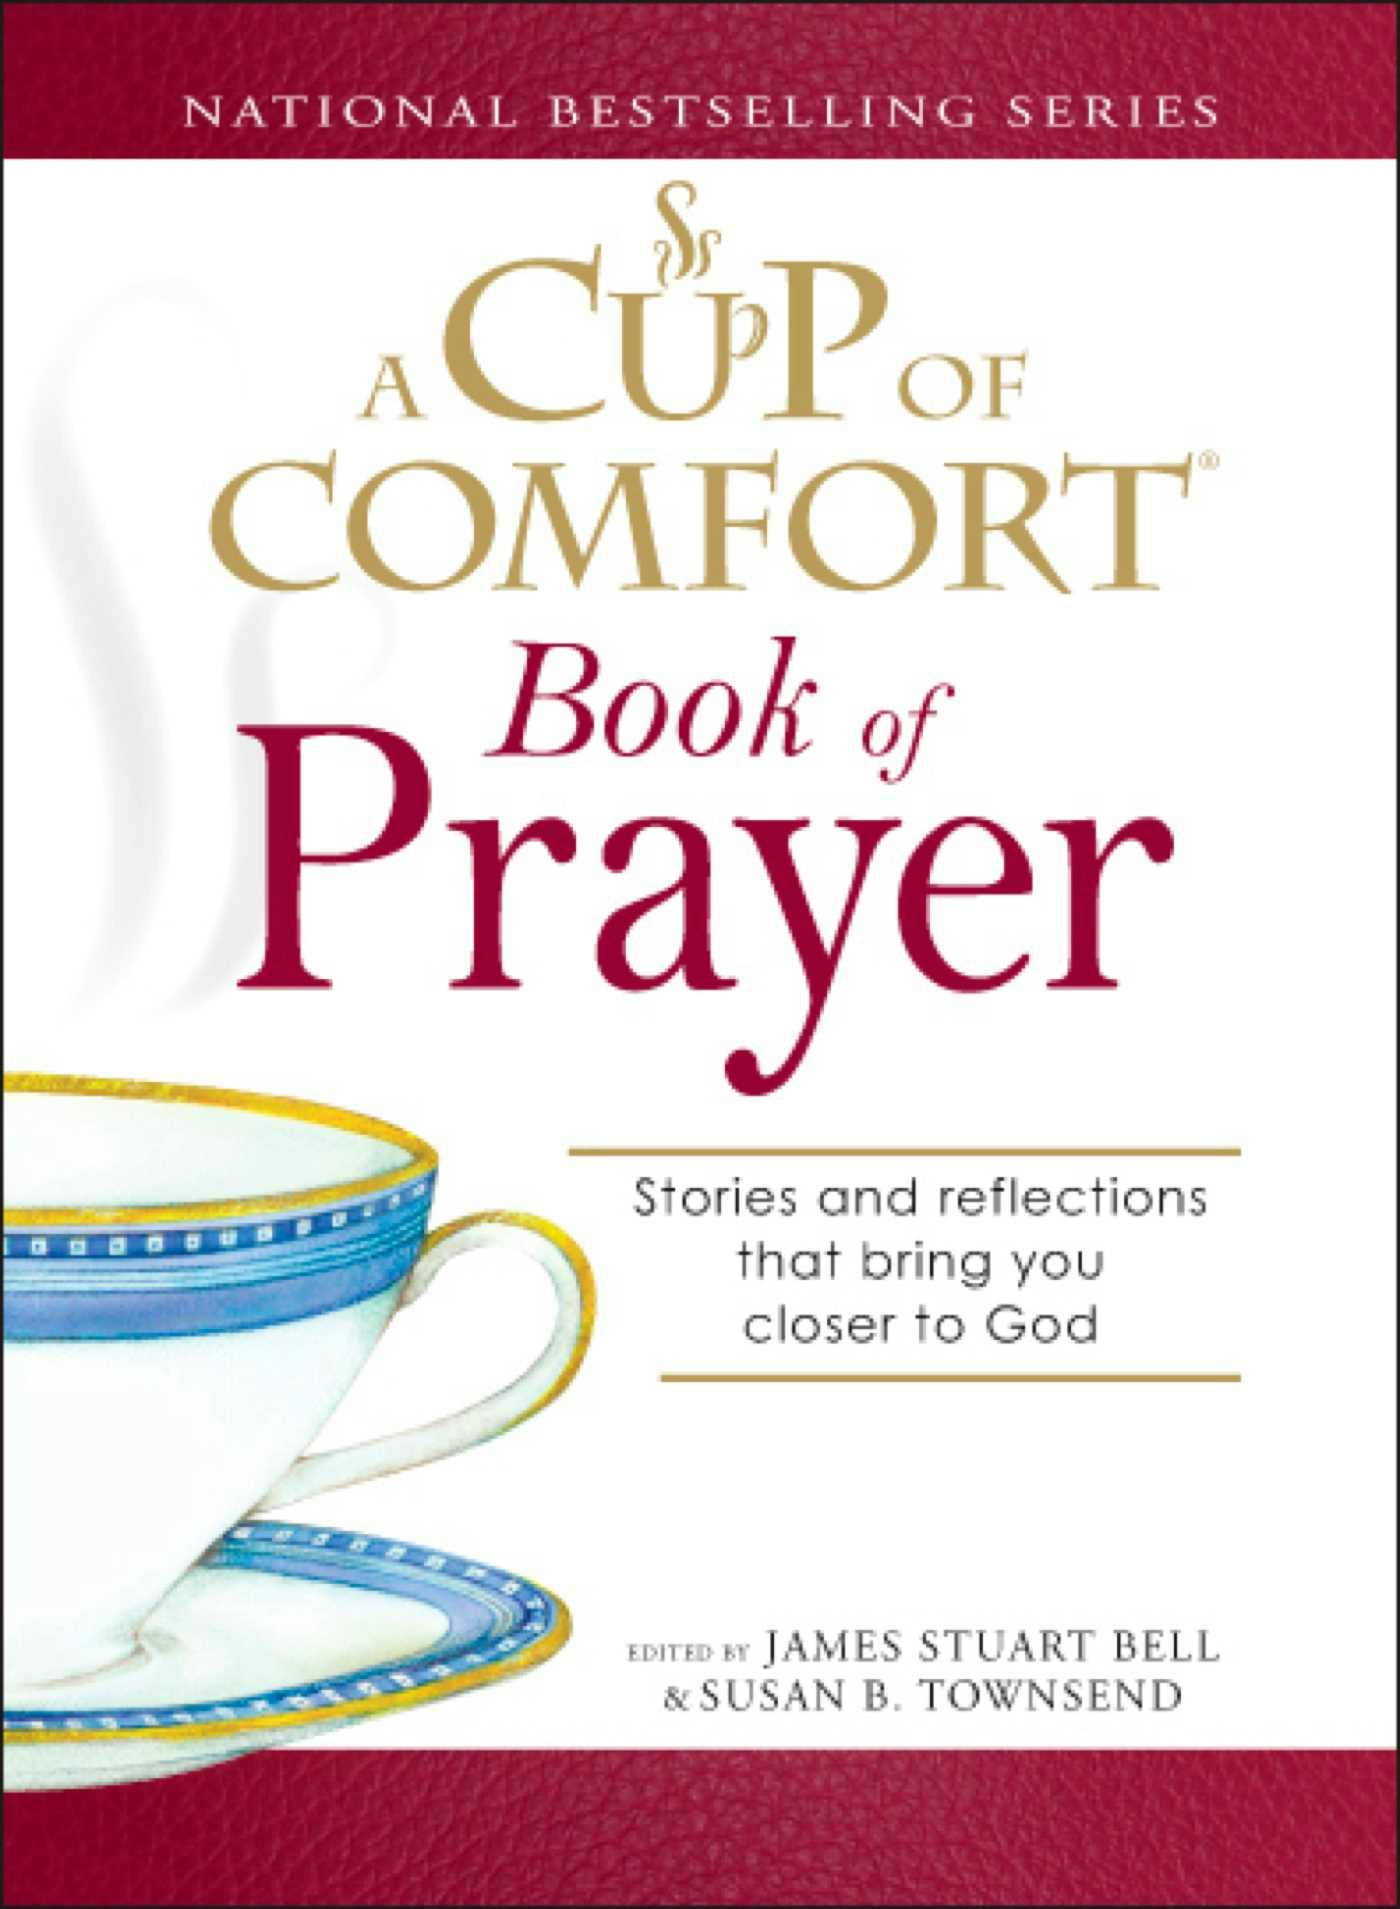 A Cup of Comfort Book of Prayer: Stories and reflections that bring you closer to God - James Stuart Bell, Susan B Townsend